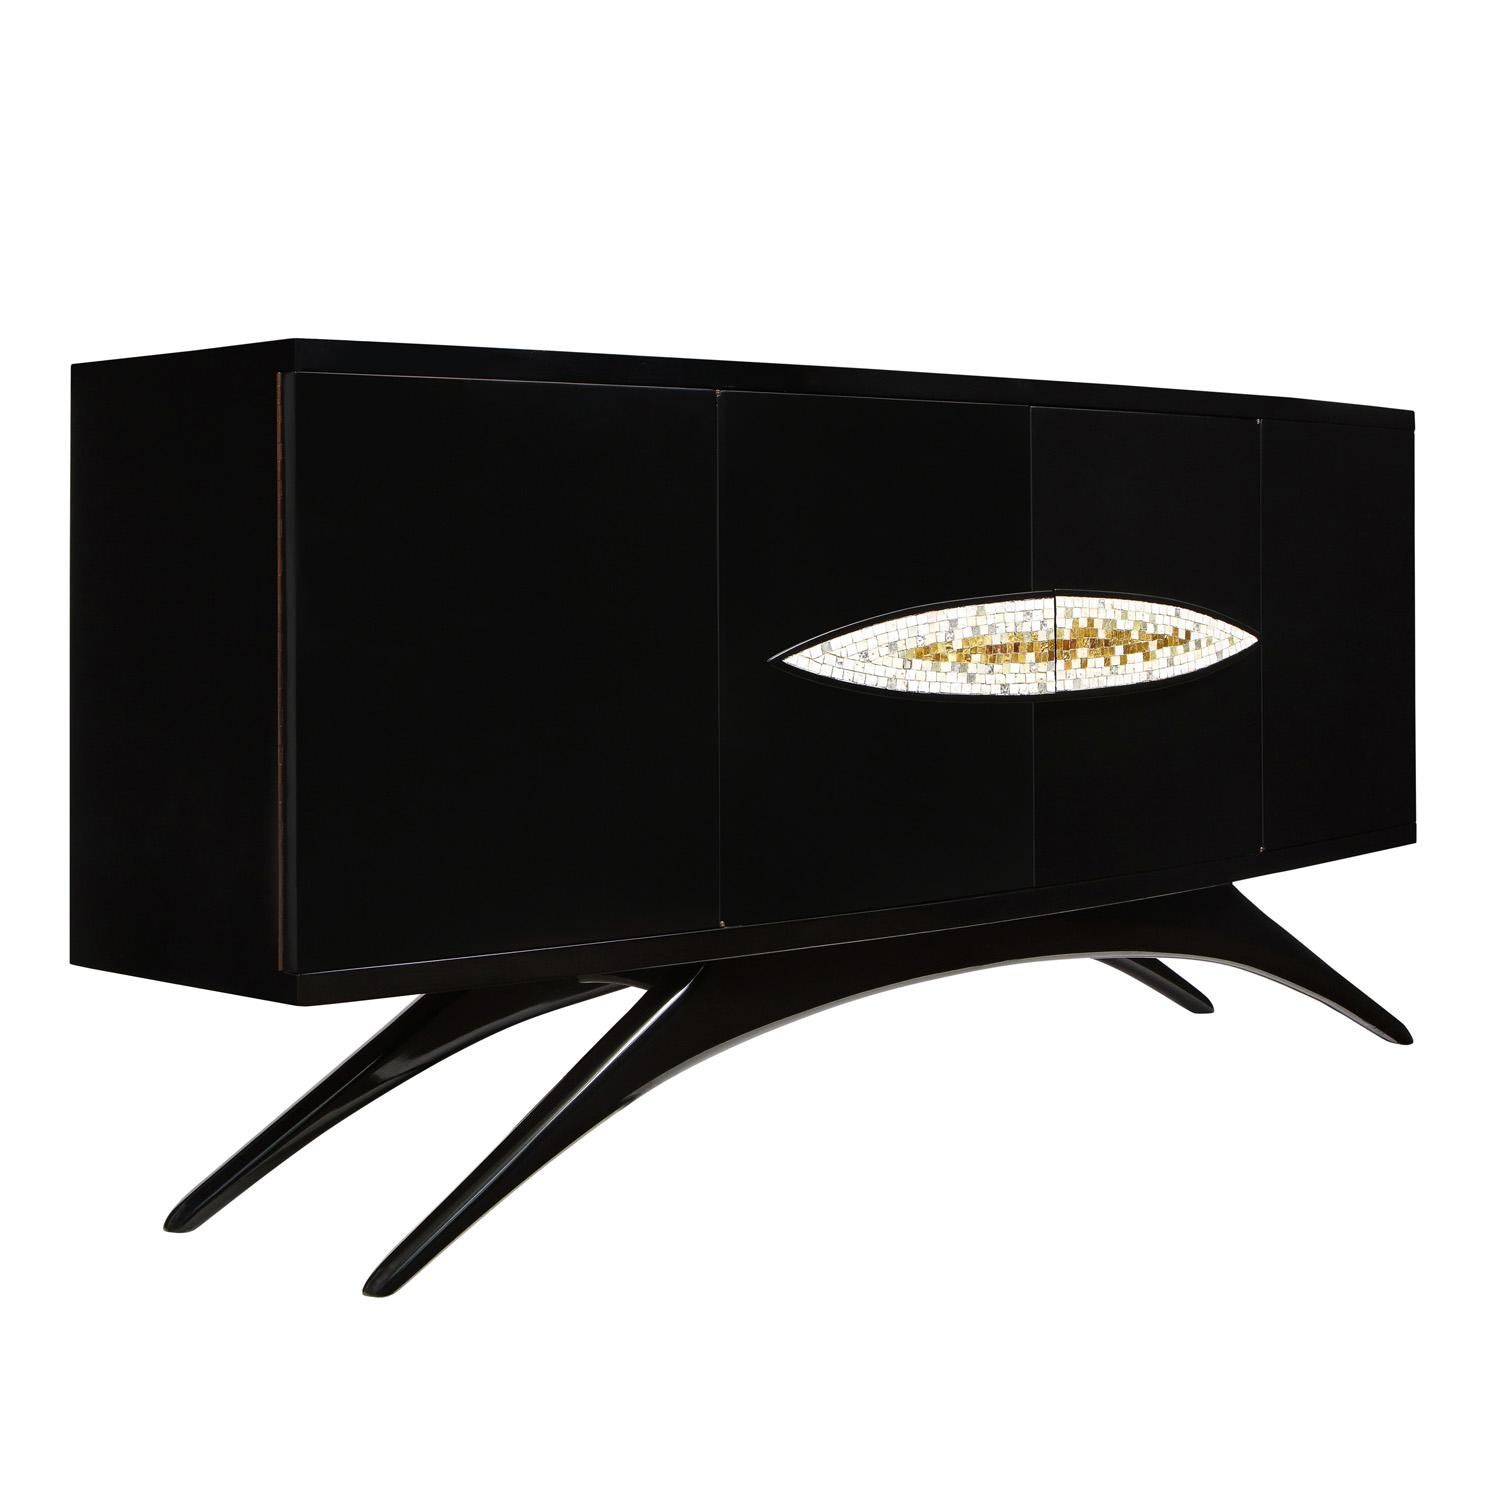 Rare and exceptional black lacquer 4 door cabinet with curved front, splayed legs and hand-set Venetian glass tiles by Vladimir Kagan, American 1953. This cabinet is an extraordinary example of Kagan’s ability to combine graceful organic design with